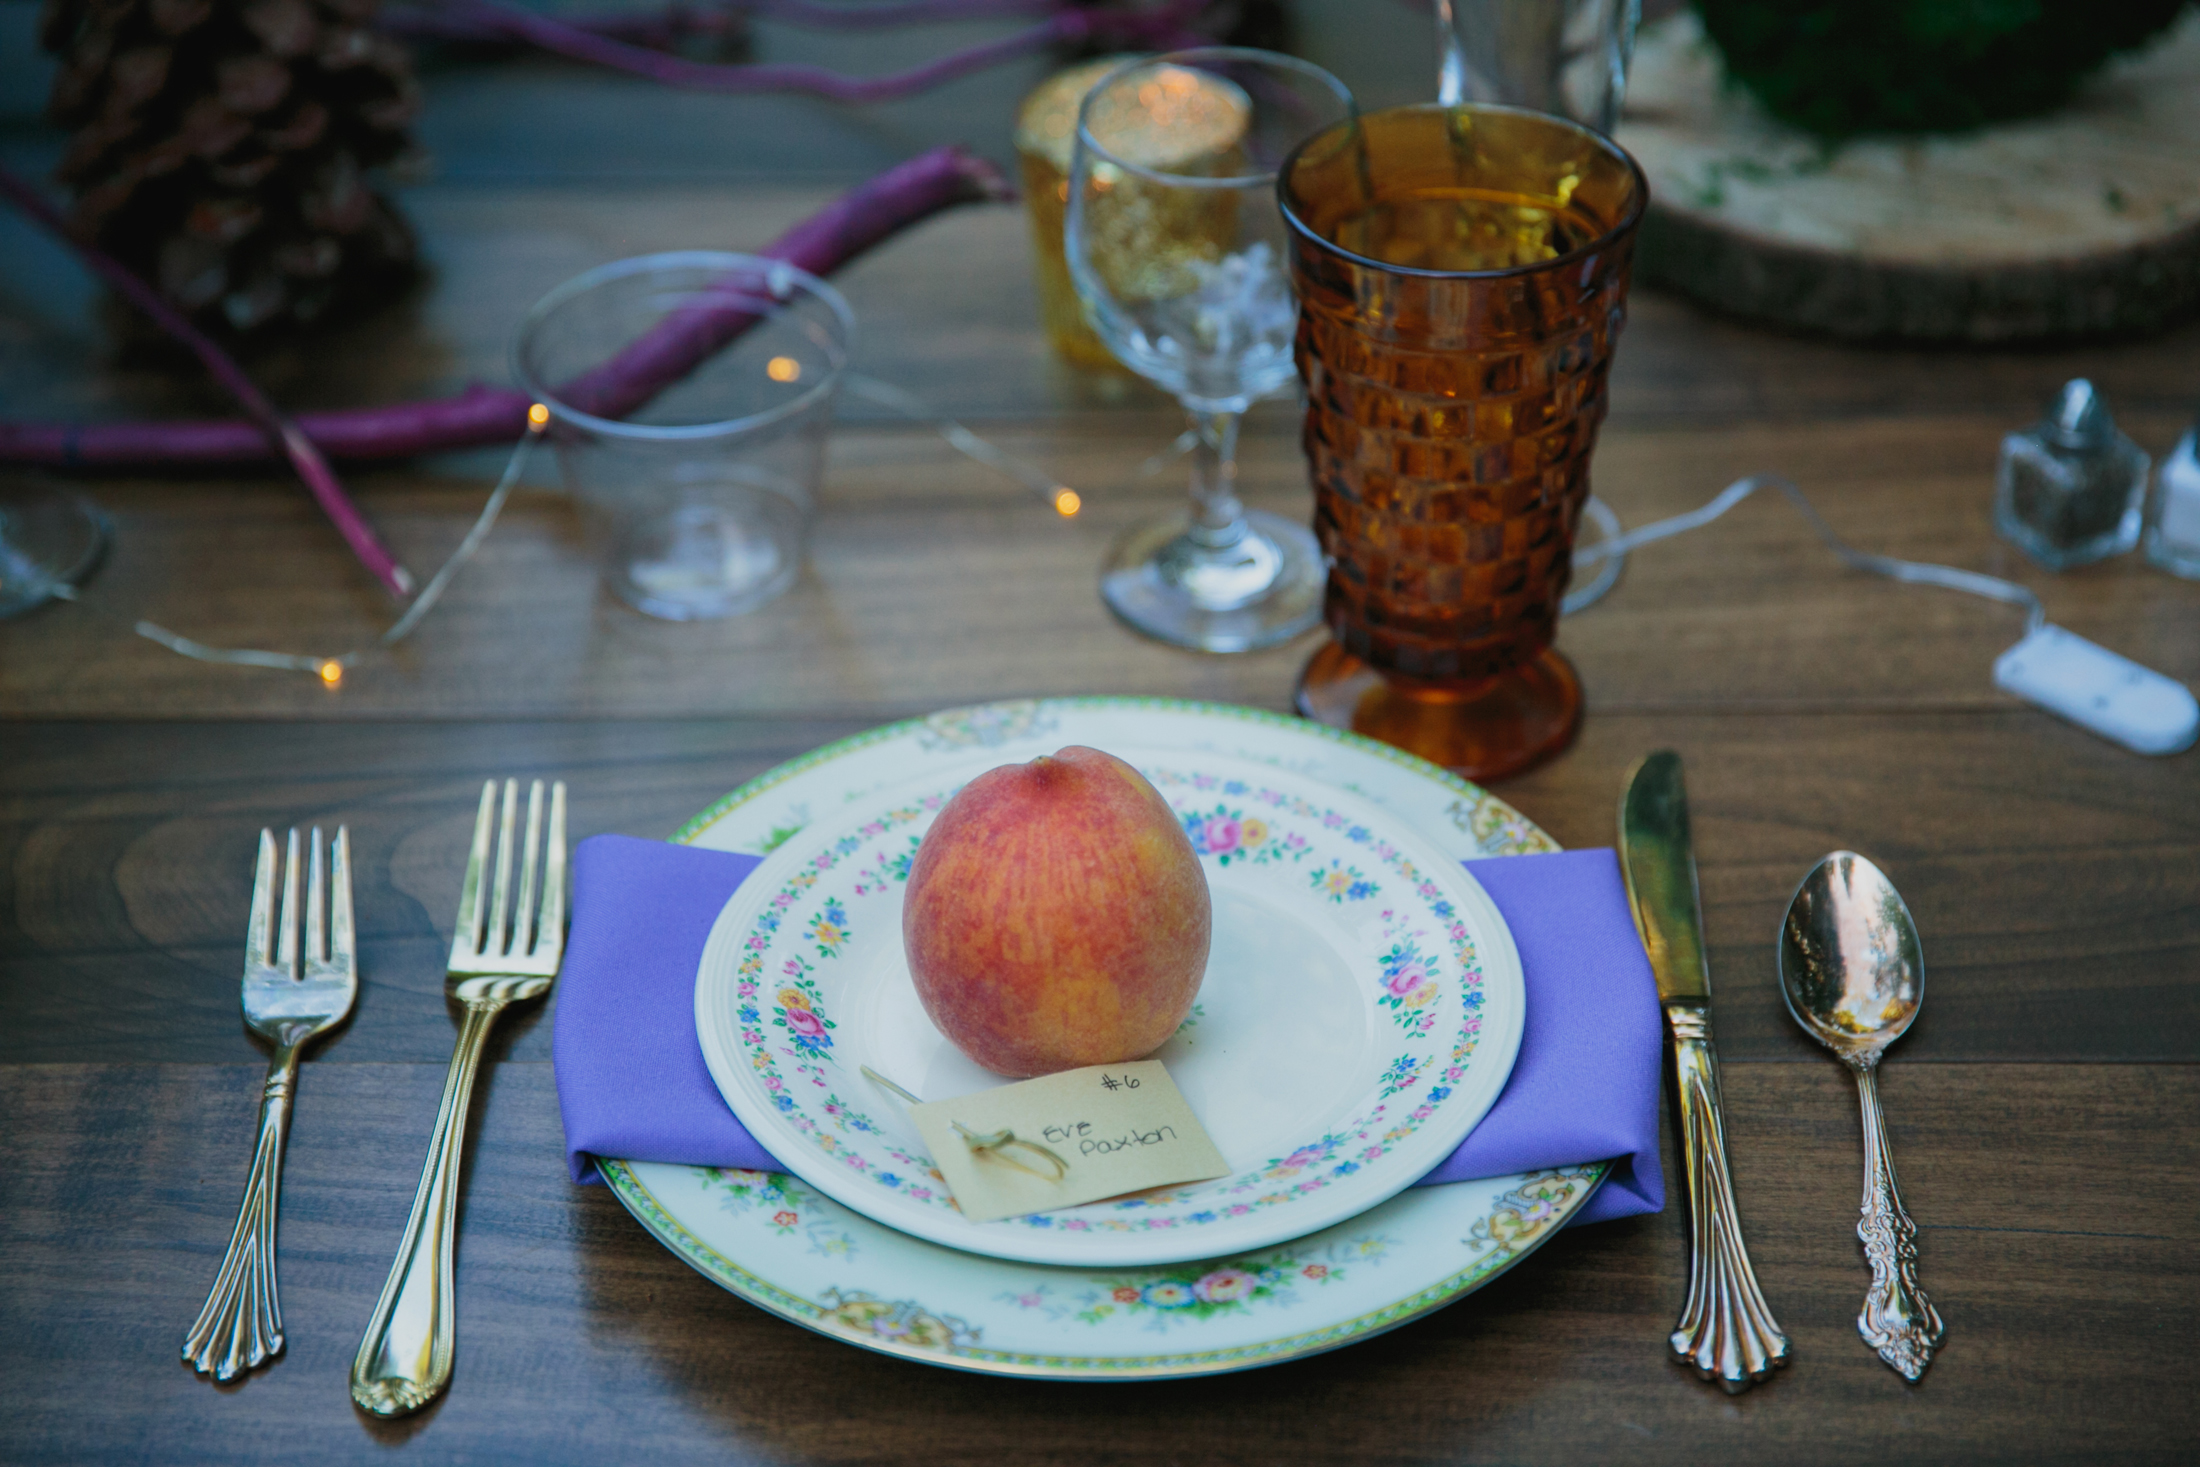 A single place-setting with a ripe peach on the vintage plate.